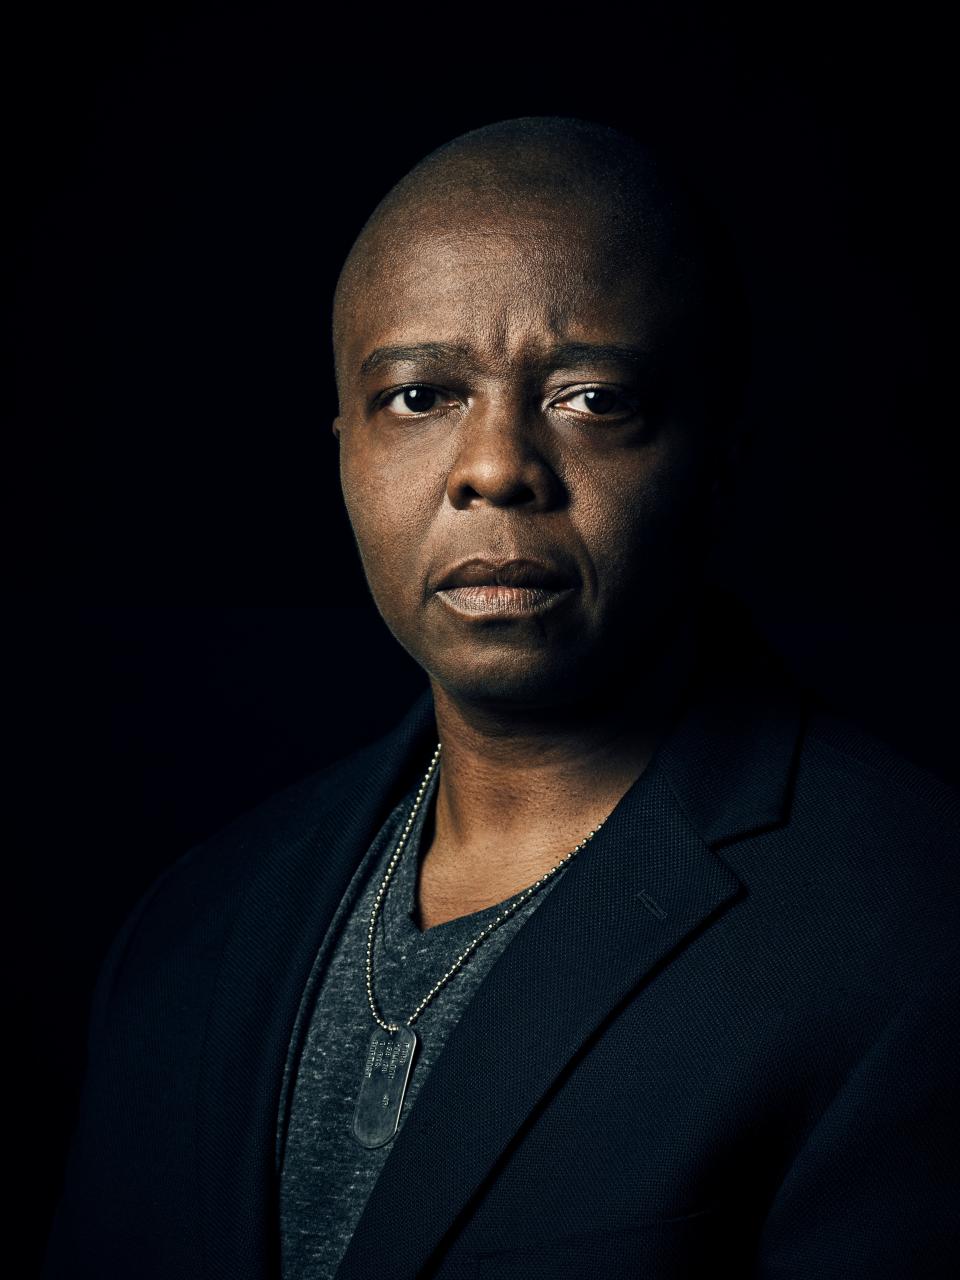 Yance Ford is the director of "The Color of Care," a film he made with Oprah Winfrey that highlights racial health disparities during the COVID-19 pandemic. The documentary premieres May 1 on Smithsonian Channel.